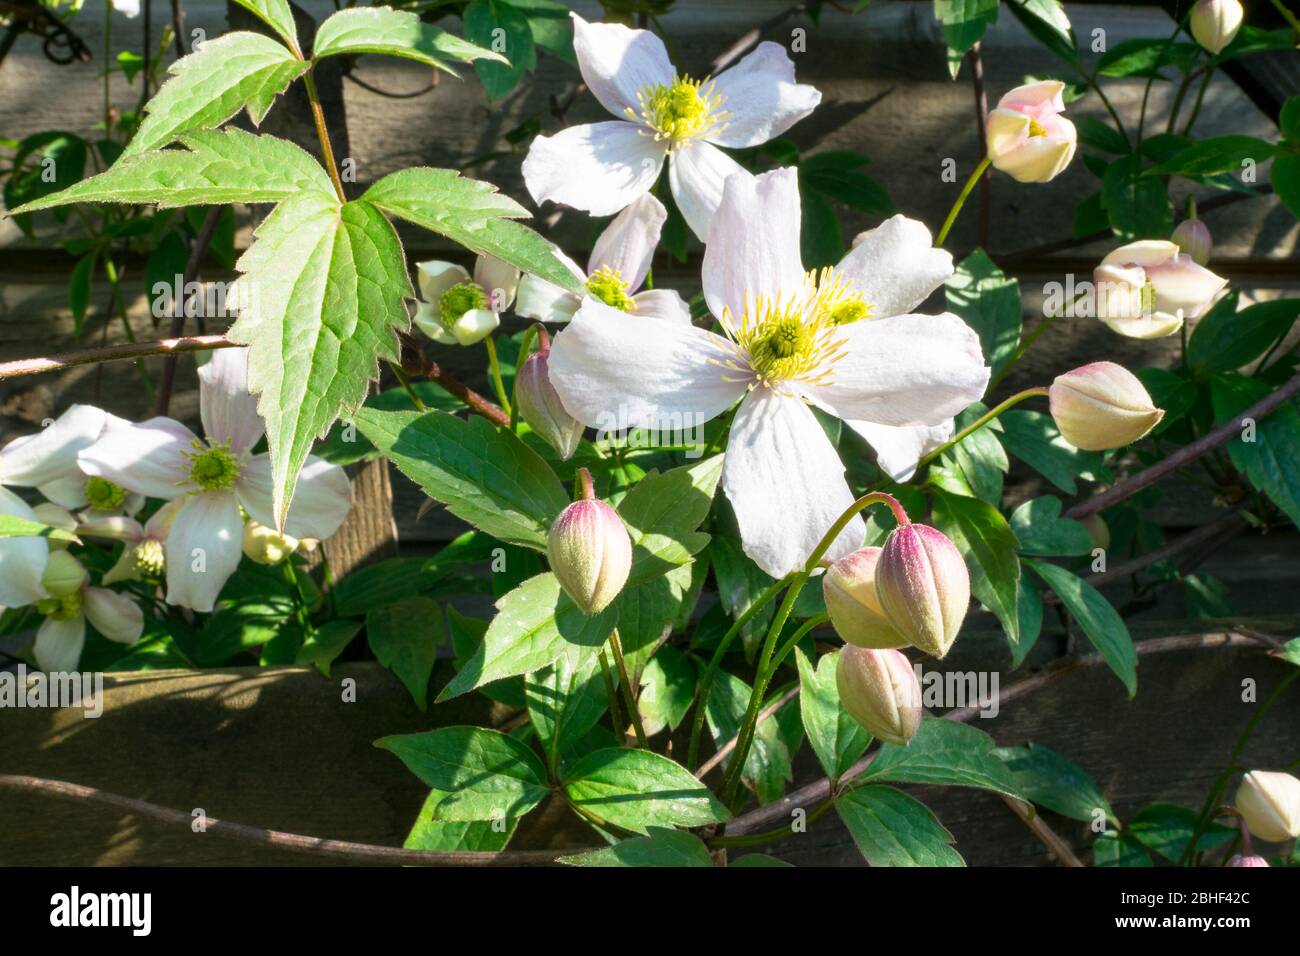 Flowers of Clematis montana (also known as mountain clematis or Himalayan clematis) growing along a fence in a garden Stock Photo